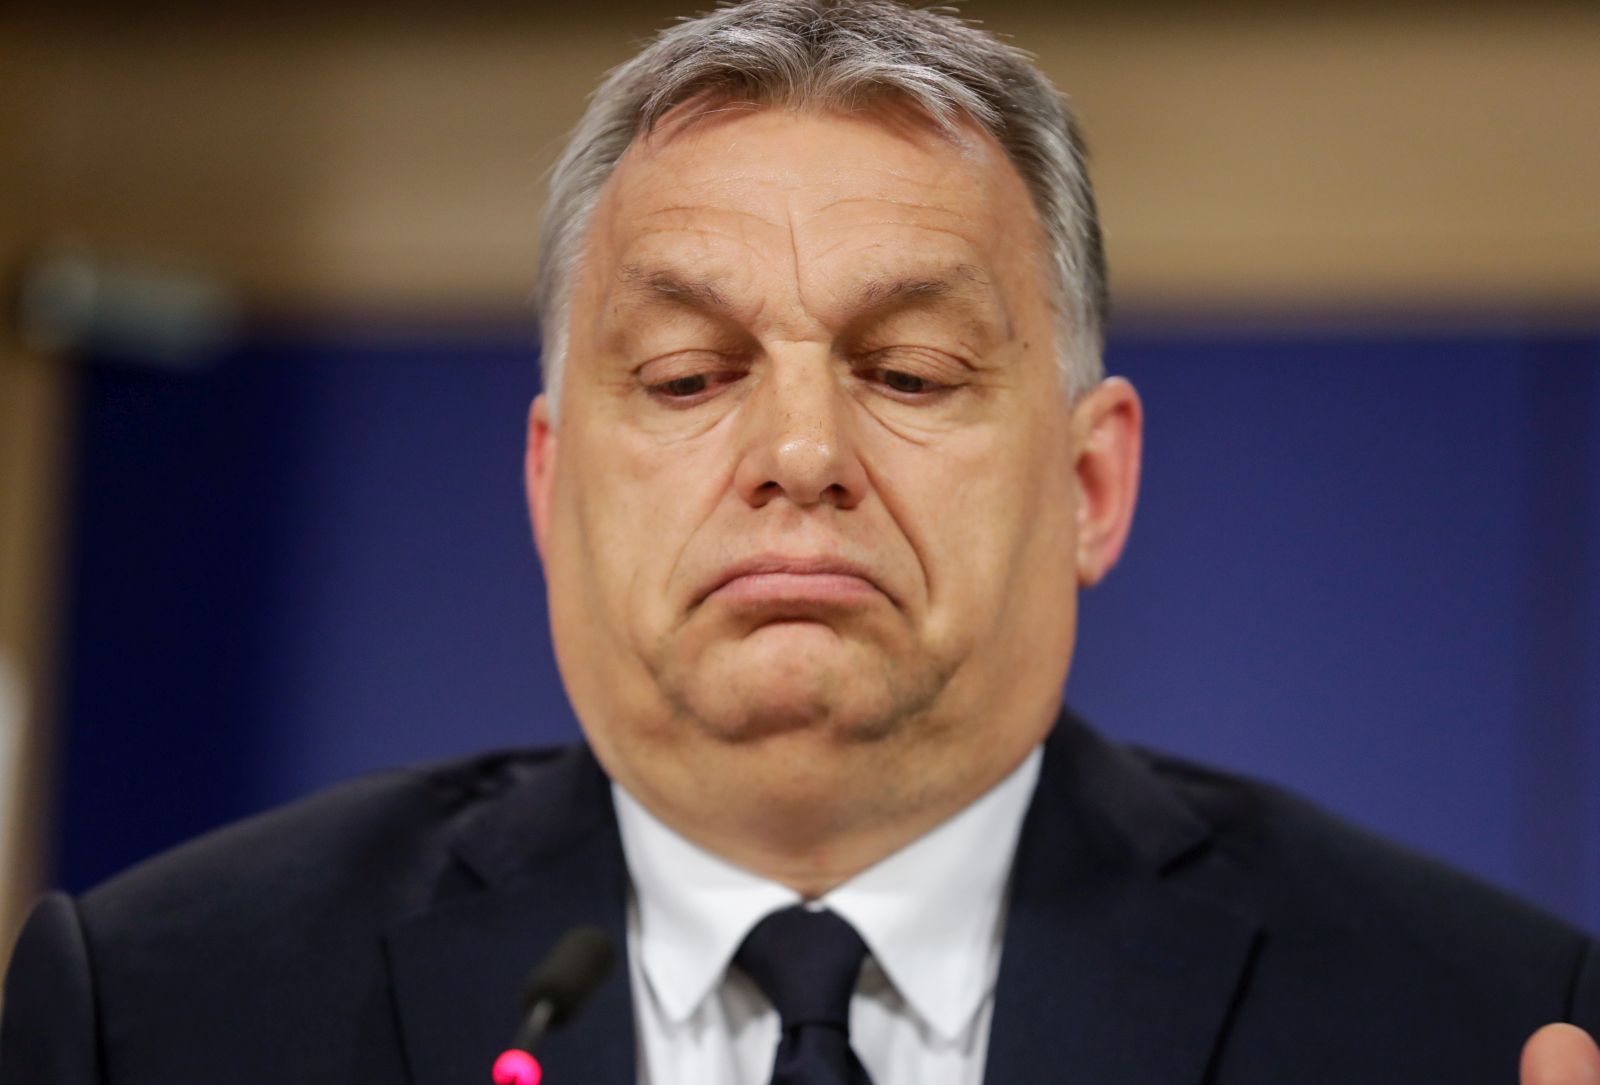 epa09048482 (FILE) Hungarian Prime Minister Viktor Orban gives a press conference at the end of the European People's Party (EPP) Political Assembly at the European Parliament in Brussels, Belgium, 20 March 2019 (reissued 03 March 2021). Hungary’s ruling rightwing Fidesz party announced 03 March 2021 it will leave the main centre-right political grouping in the European parliament after the European People’s party (EPP) voted to change its internal laws on excluding members.  EPA/STEPHANIE LECOCQ *** Local Caption *** 55069211